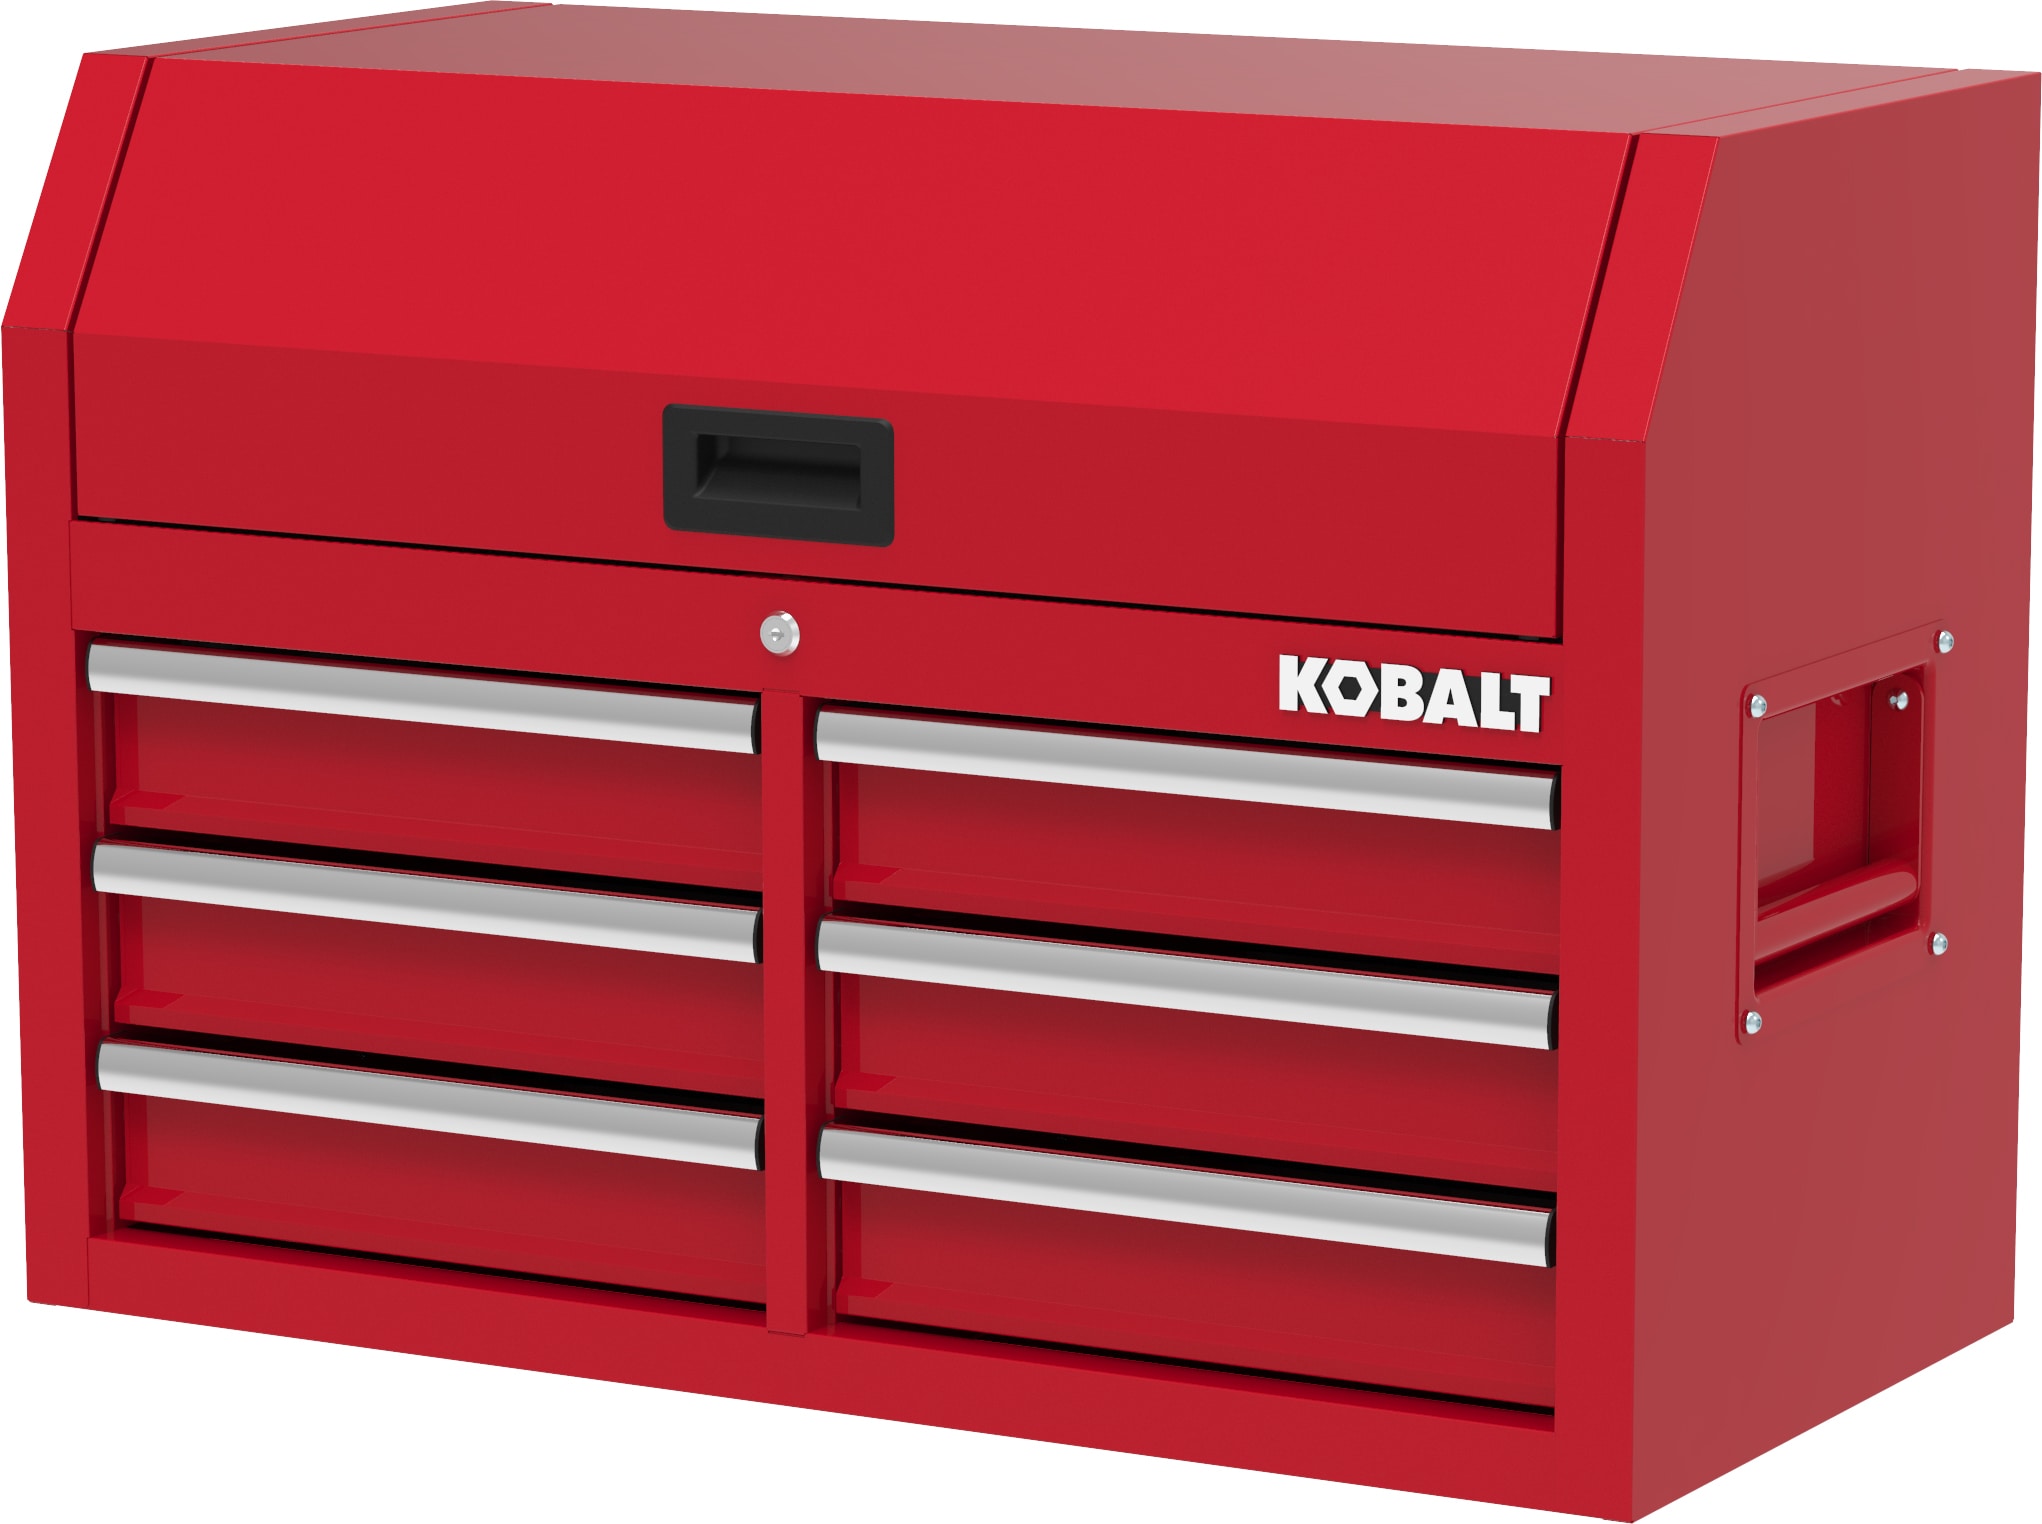 24.8-in W x 17.76-in H 6-Drawer Steel Tool Chest (Red) | - Kobalt 410-165-0131